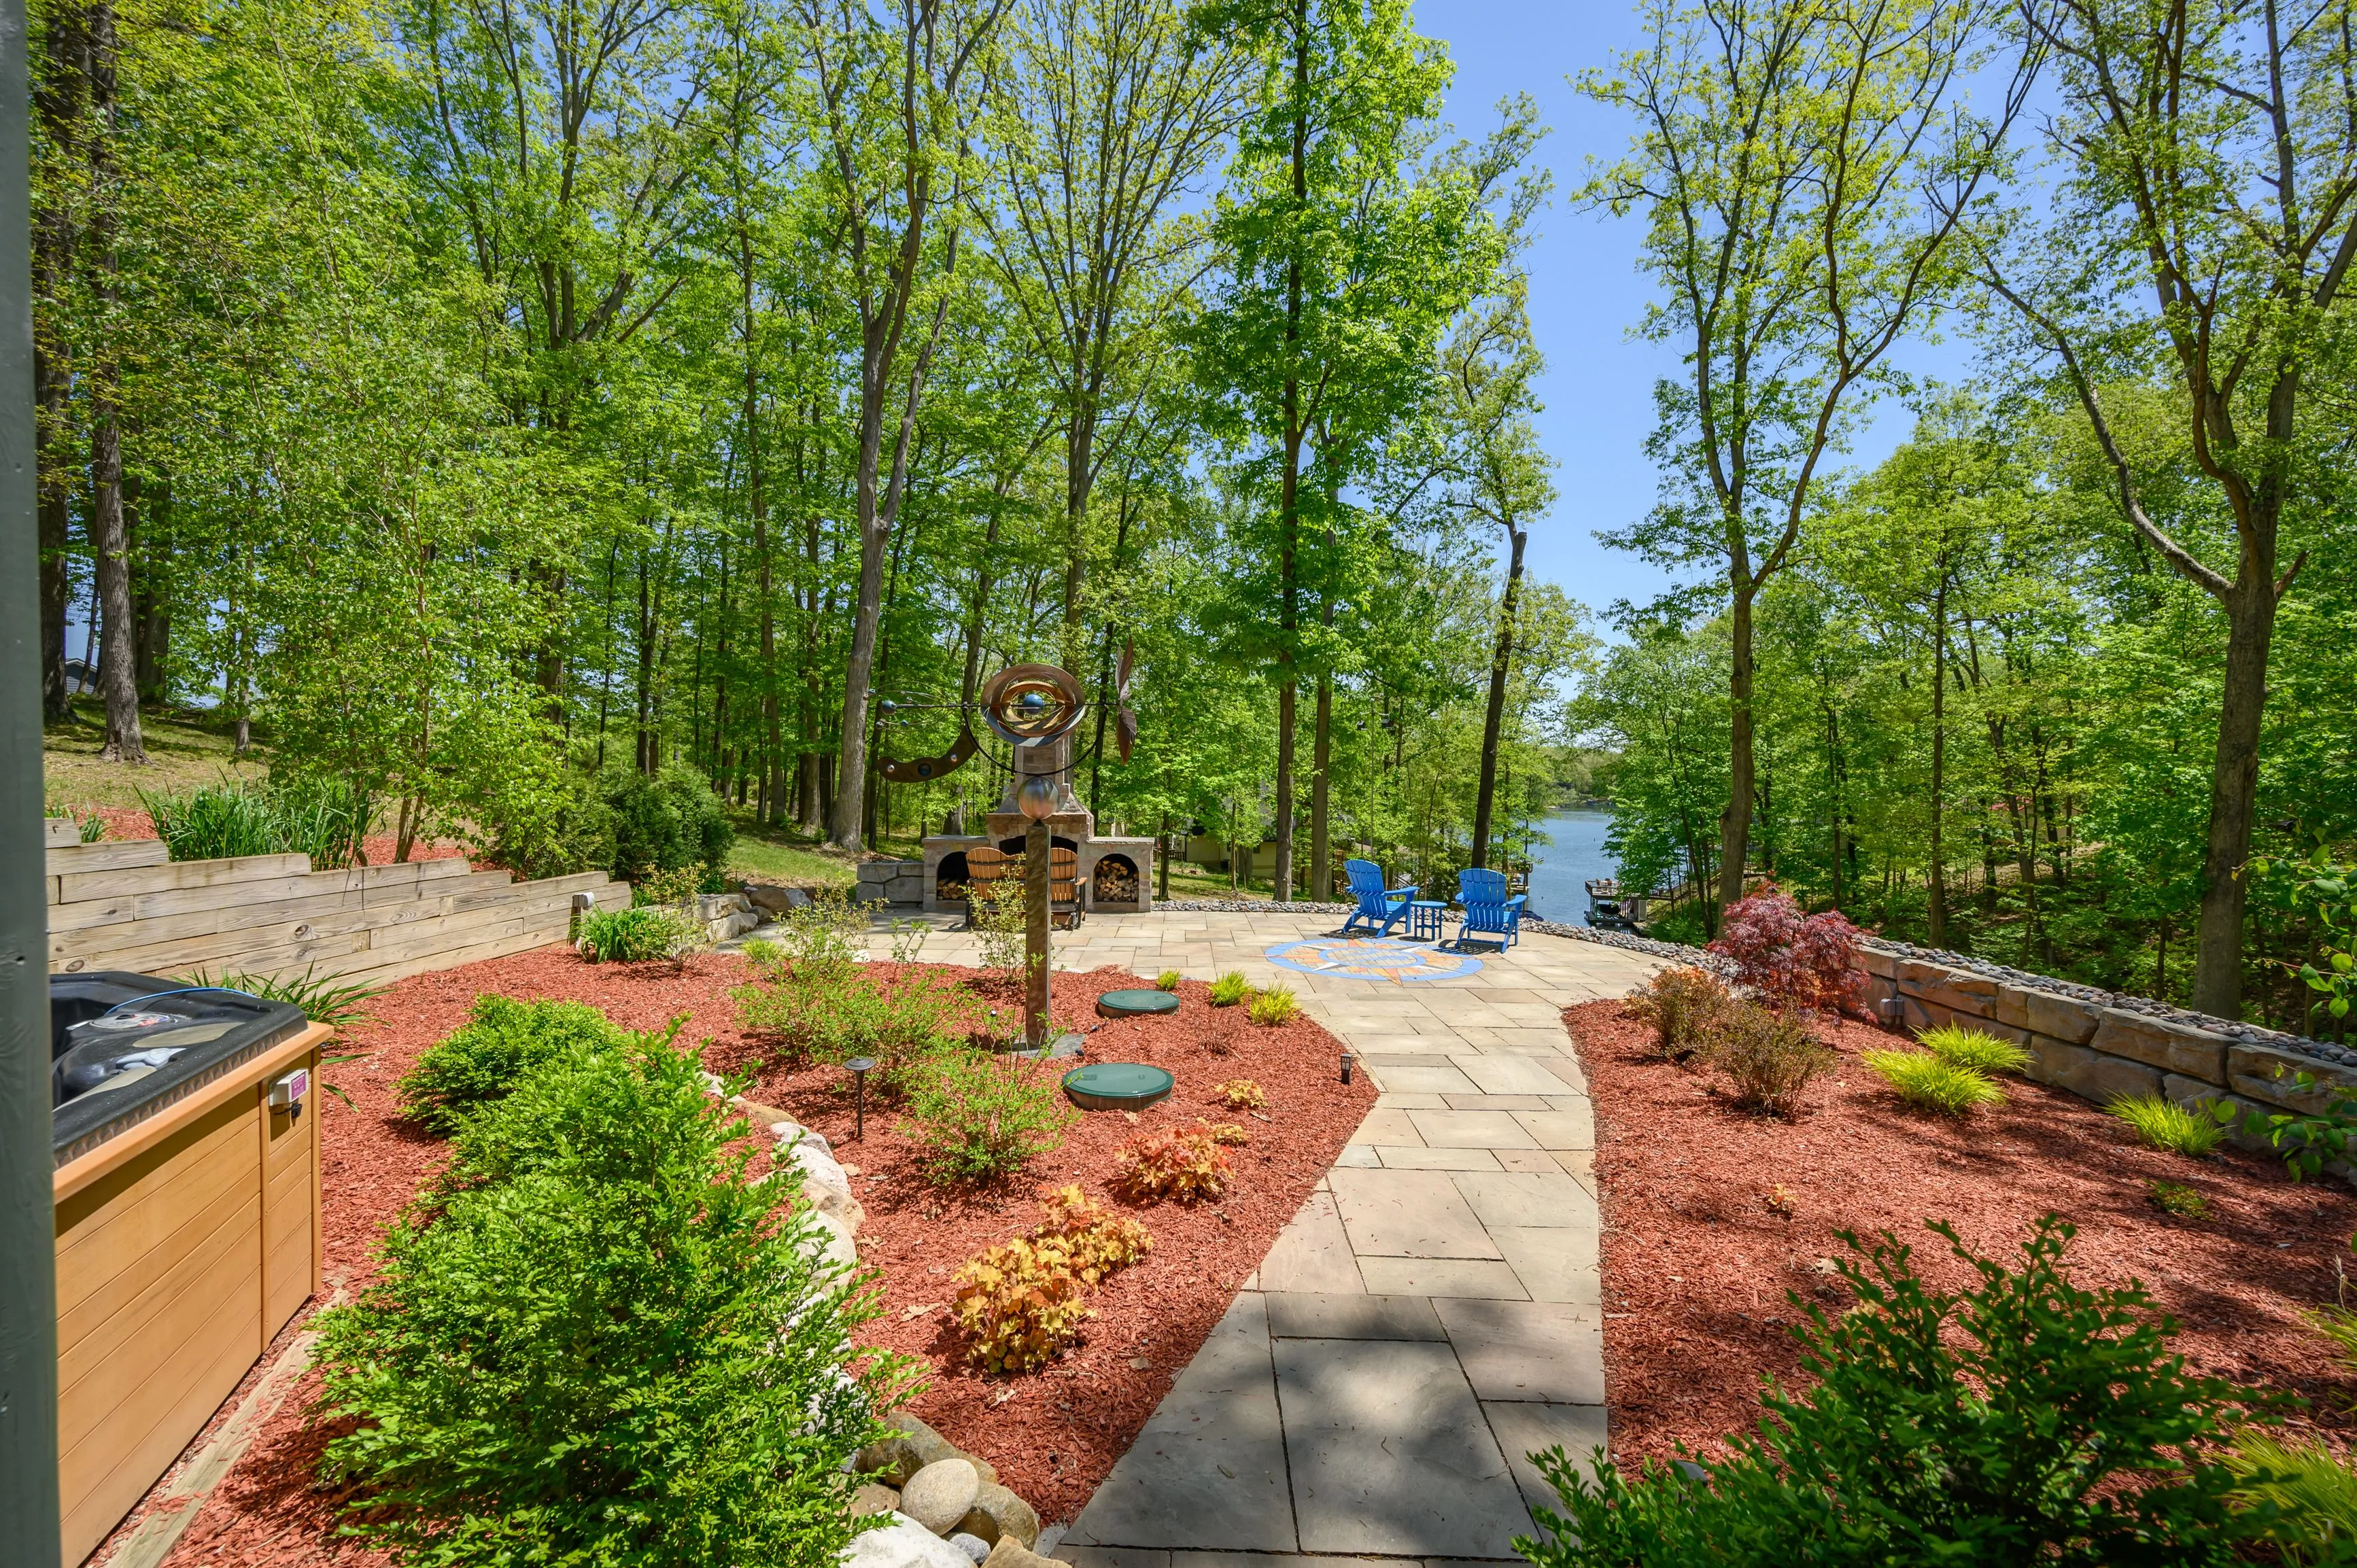 Beautifully landscaped backyard with a stone pathway, hot tub, outdoor fireplace, and two Adirondack chairs overlooking a tranquil lake surrounded by lush greenery.